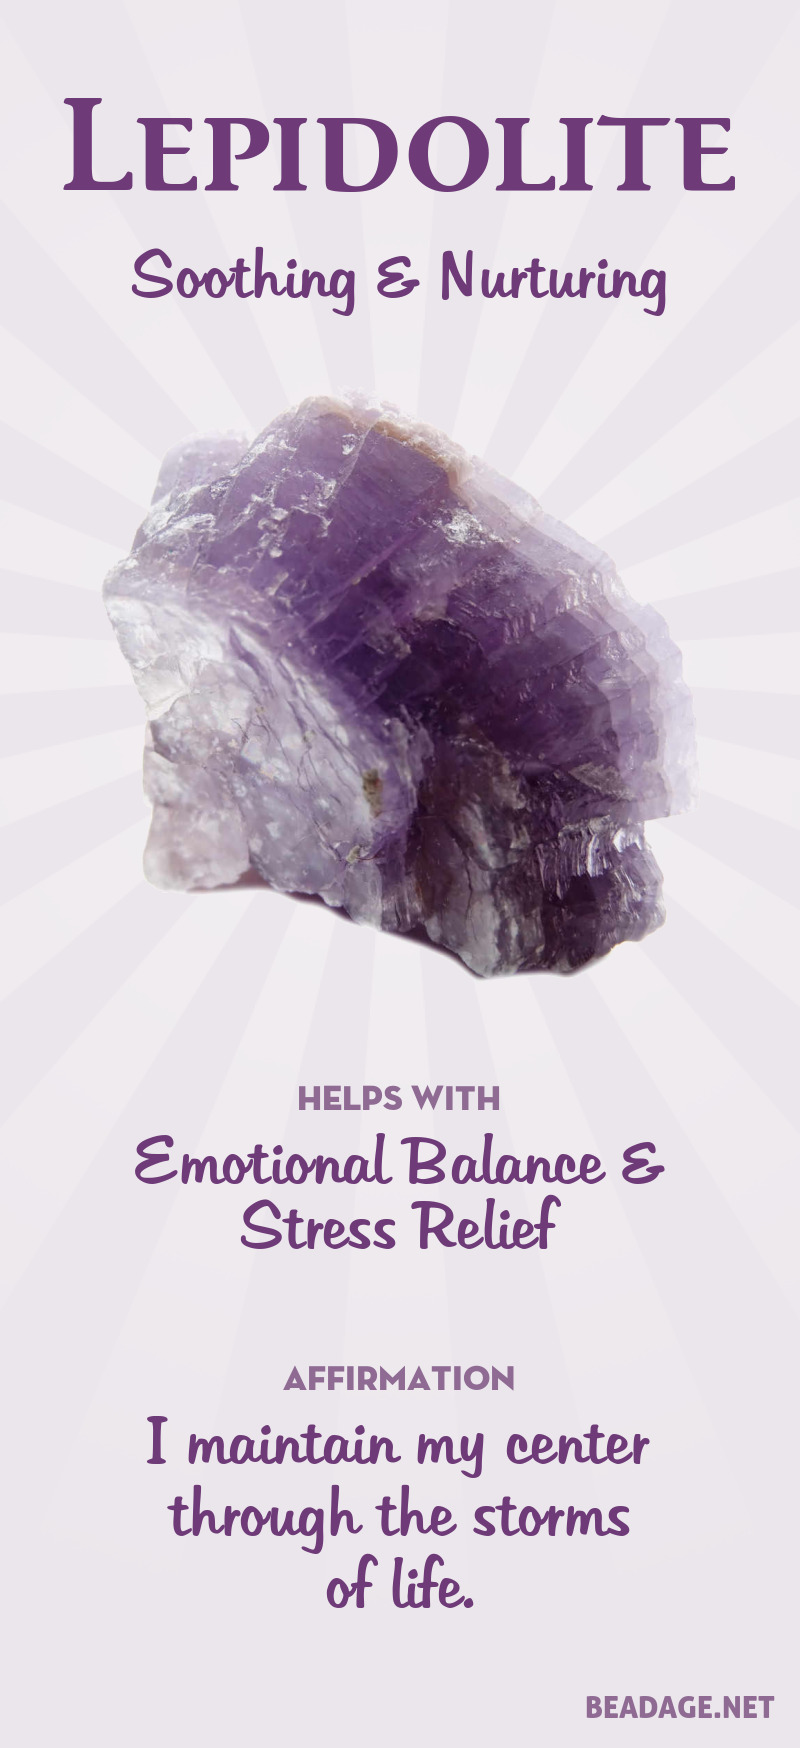 Lepidolite helps with stress and worry when life feels turbulent and overwhelming. It can help you stay focused on the present, relieving worry about the future and letting go of stuck patterns from the past.  Learn more about Lepidolite meaning + healing properties, benefits & more. Visit to find gemstone meanings & info about crystal healing, stone powers, and chakra stones. Get some positive energy & vibes! #gemstones #crystals #crystalhealing #beadage